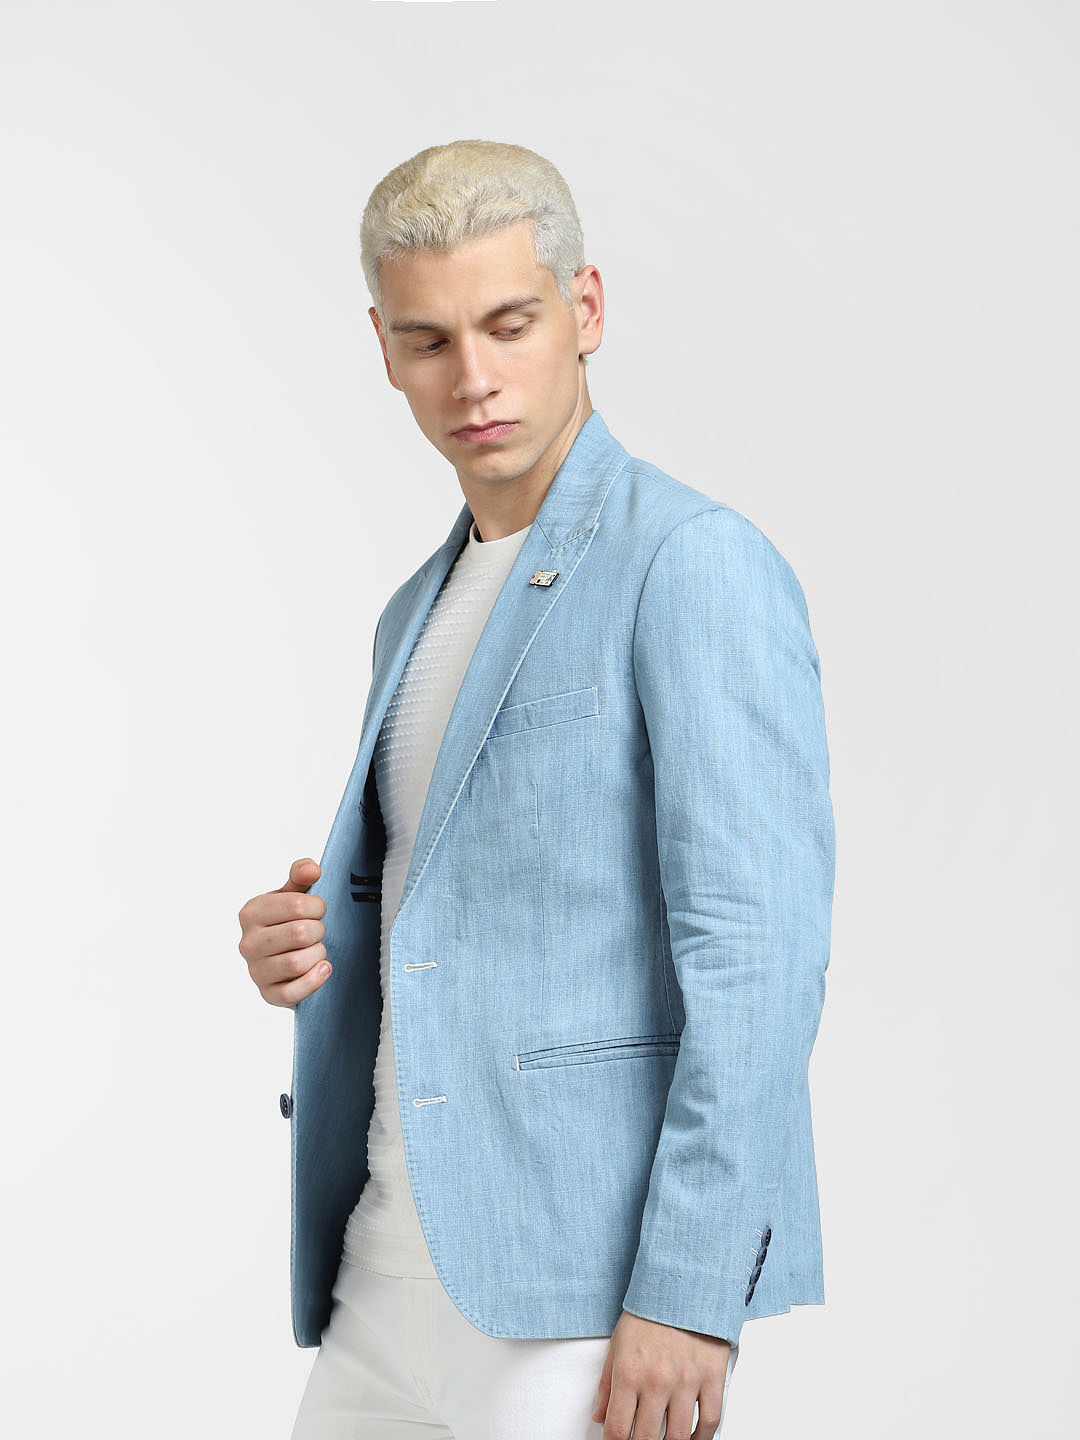 How to Style a Denim Blazer for Any Occasion